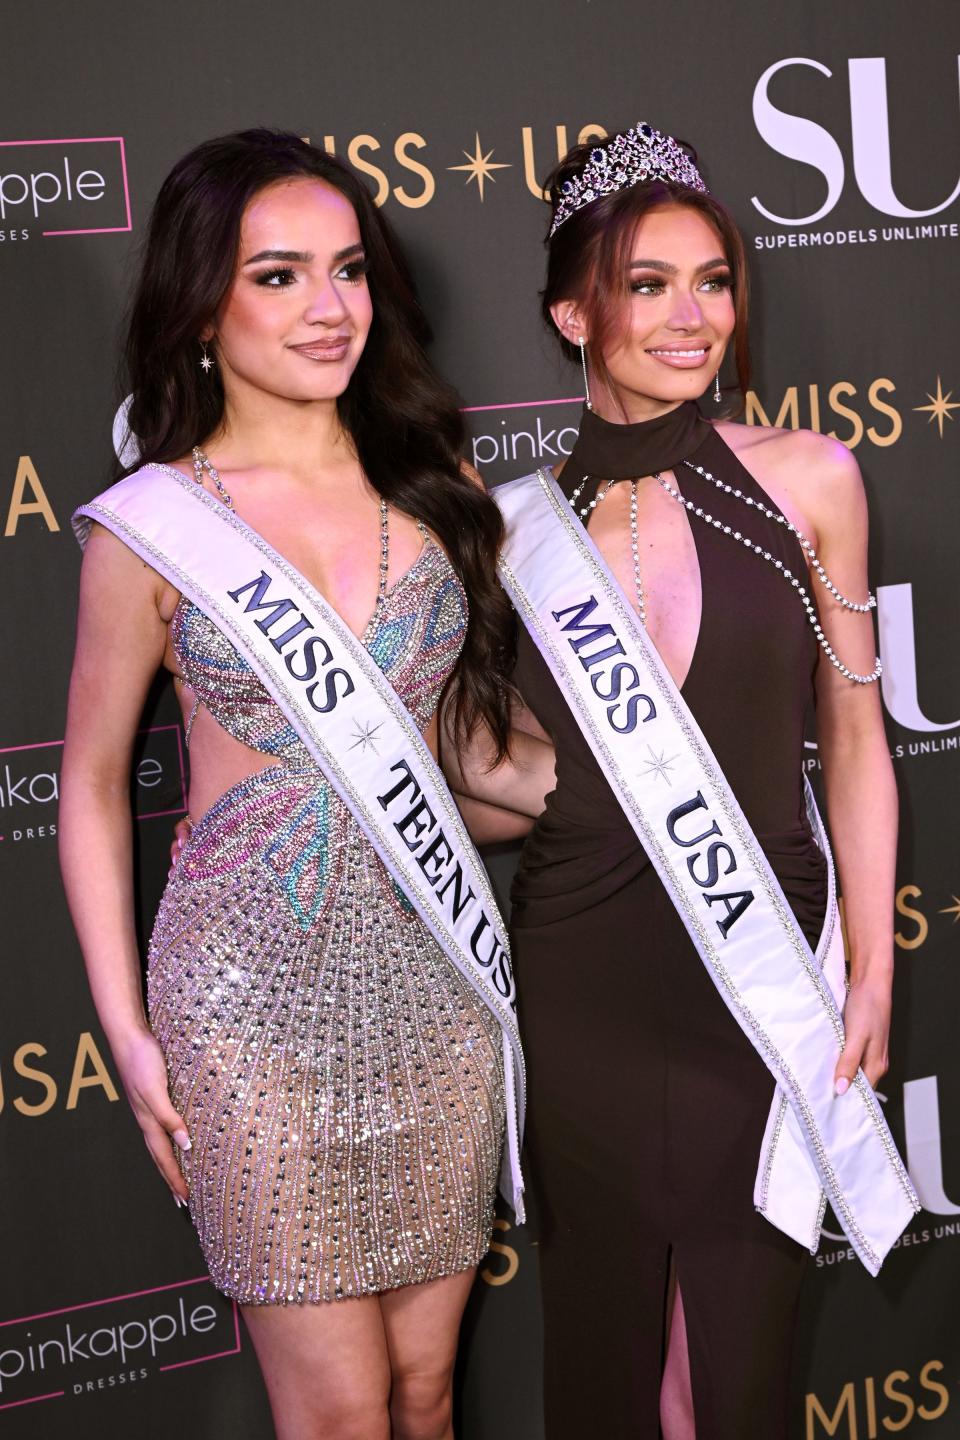 Miss Teen USA 2023, UmaSofia Srivastava (left) and Miss USA 2023, Noelia Voigt, at an event in February. Both have since resigned,; they are bound by nondisclosure agreements, but their mothers described abusive behavior by pageant officials.